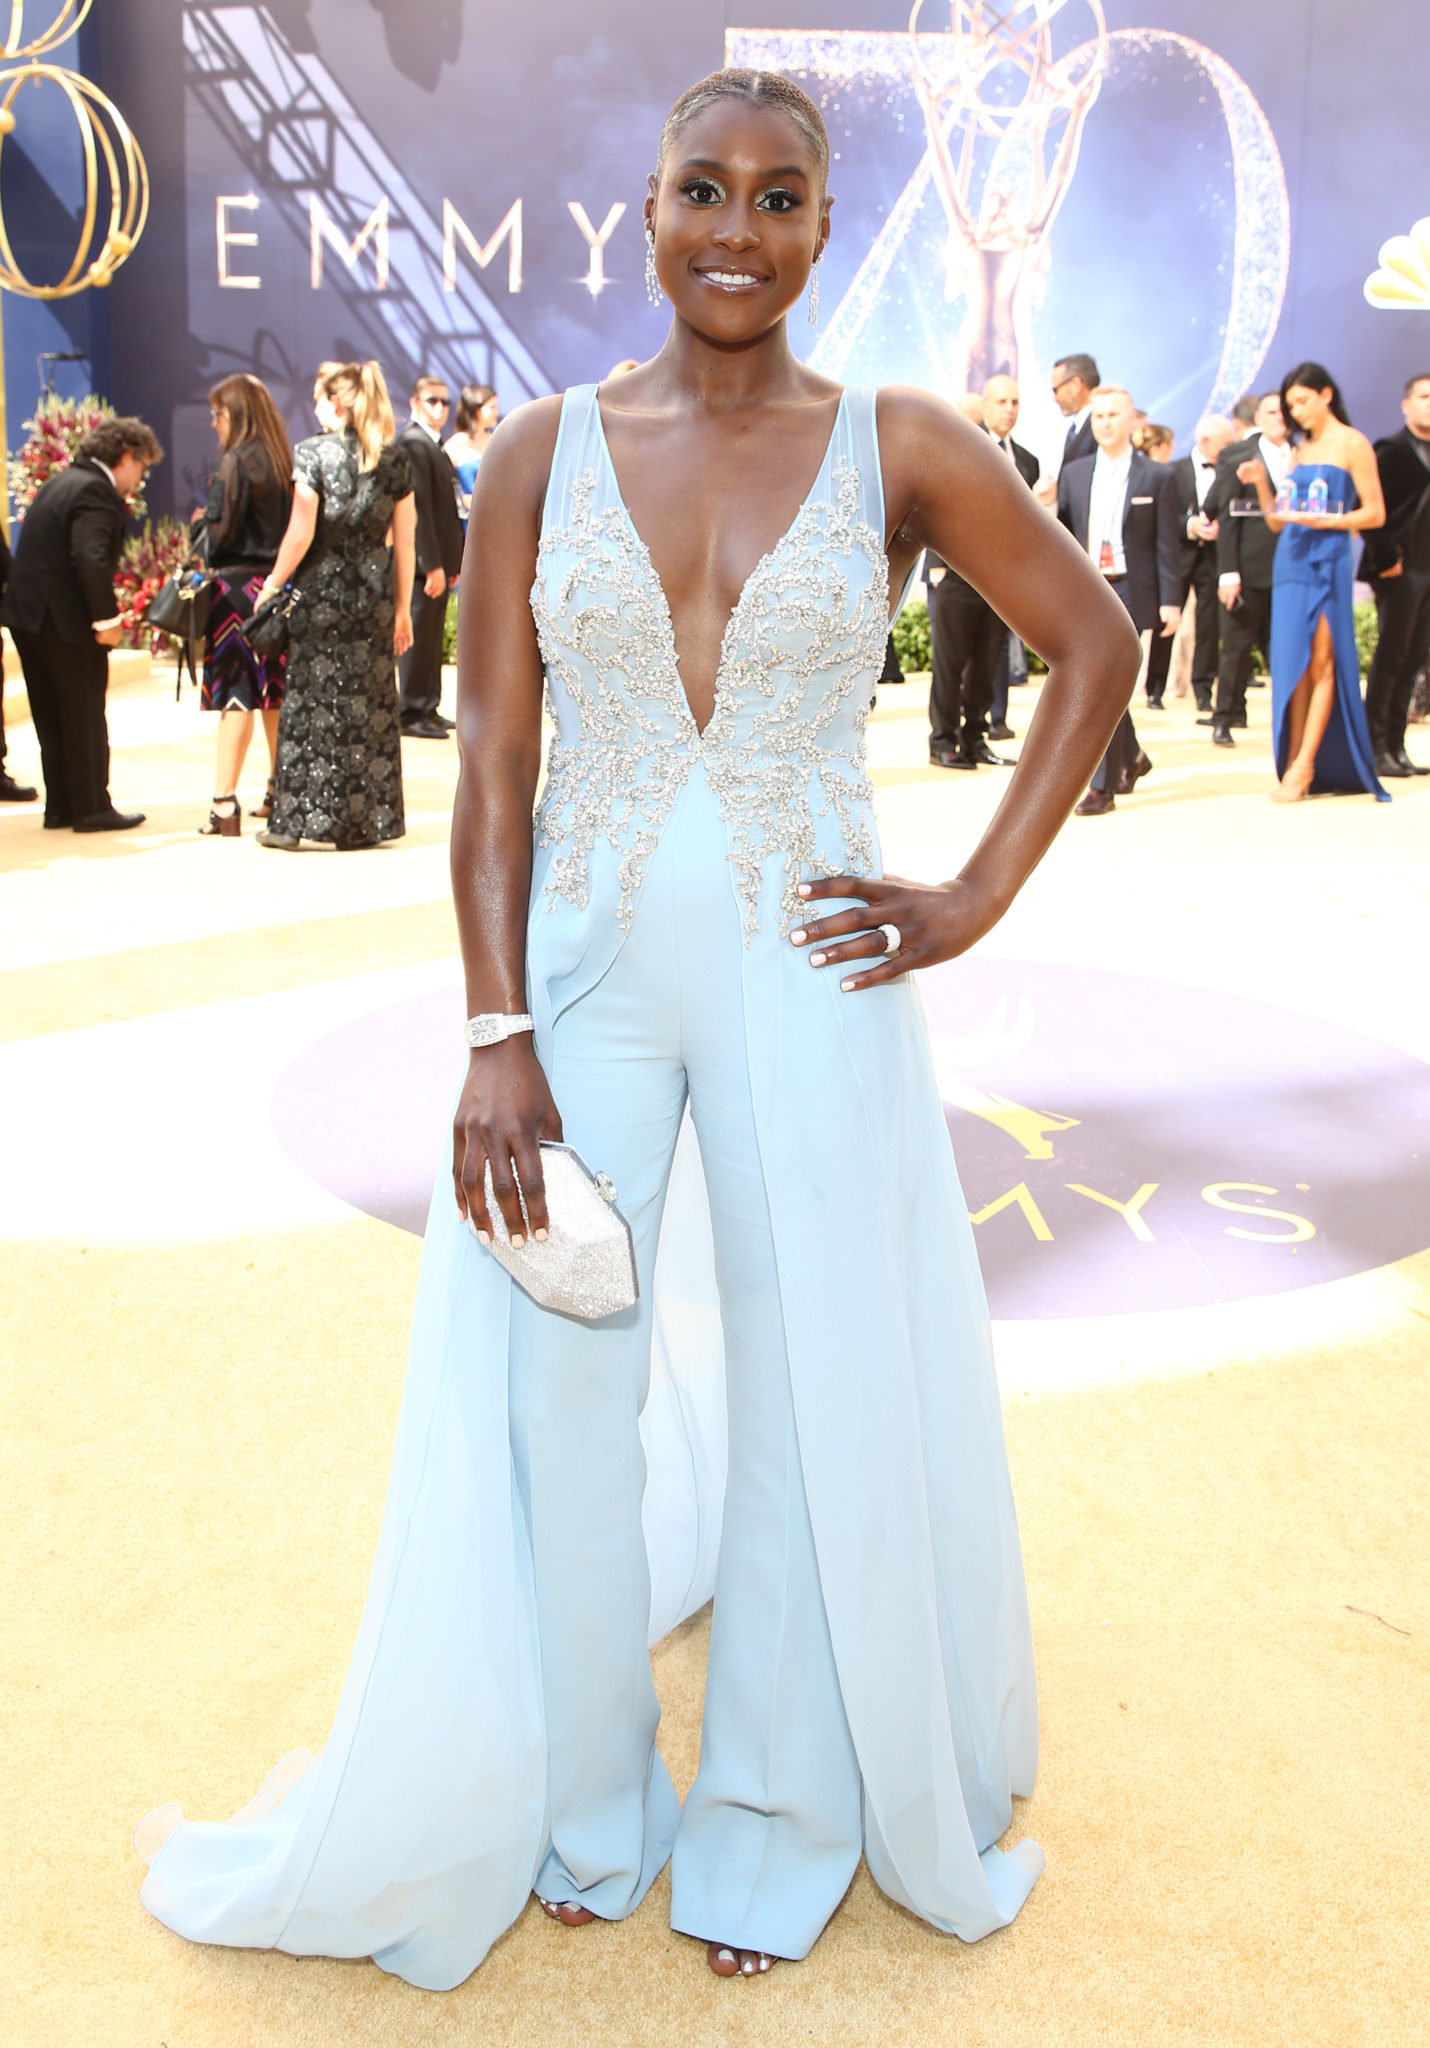 Issa Rae Emmys 4Chion Lifestyle